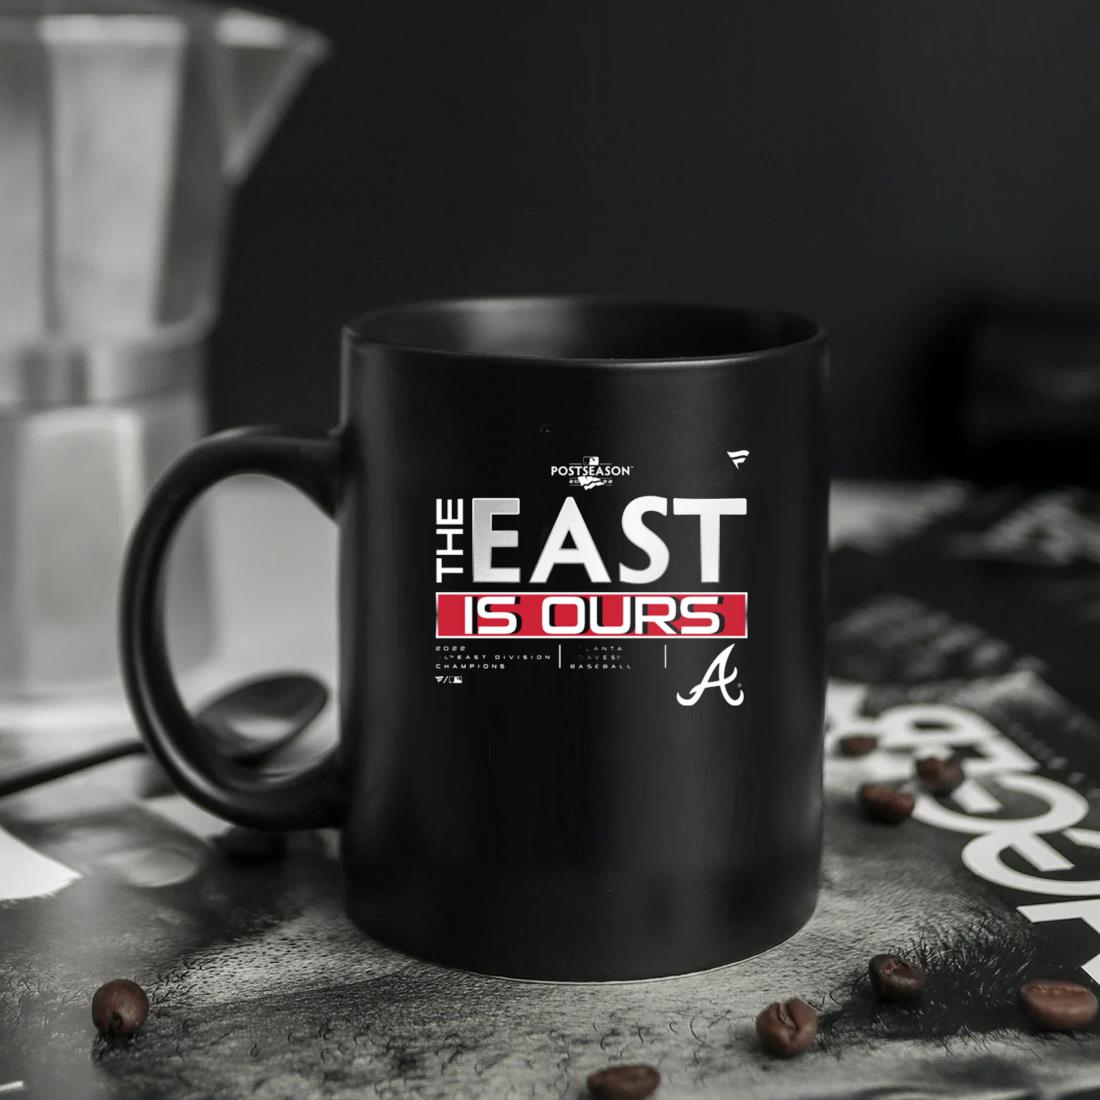 The East Is Ours Atlanta Braves Baseball 2022 NL East Division Champions  shirt, hoodie, sweatshirt and tank top